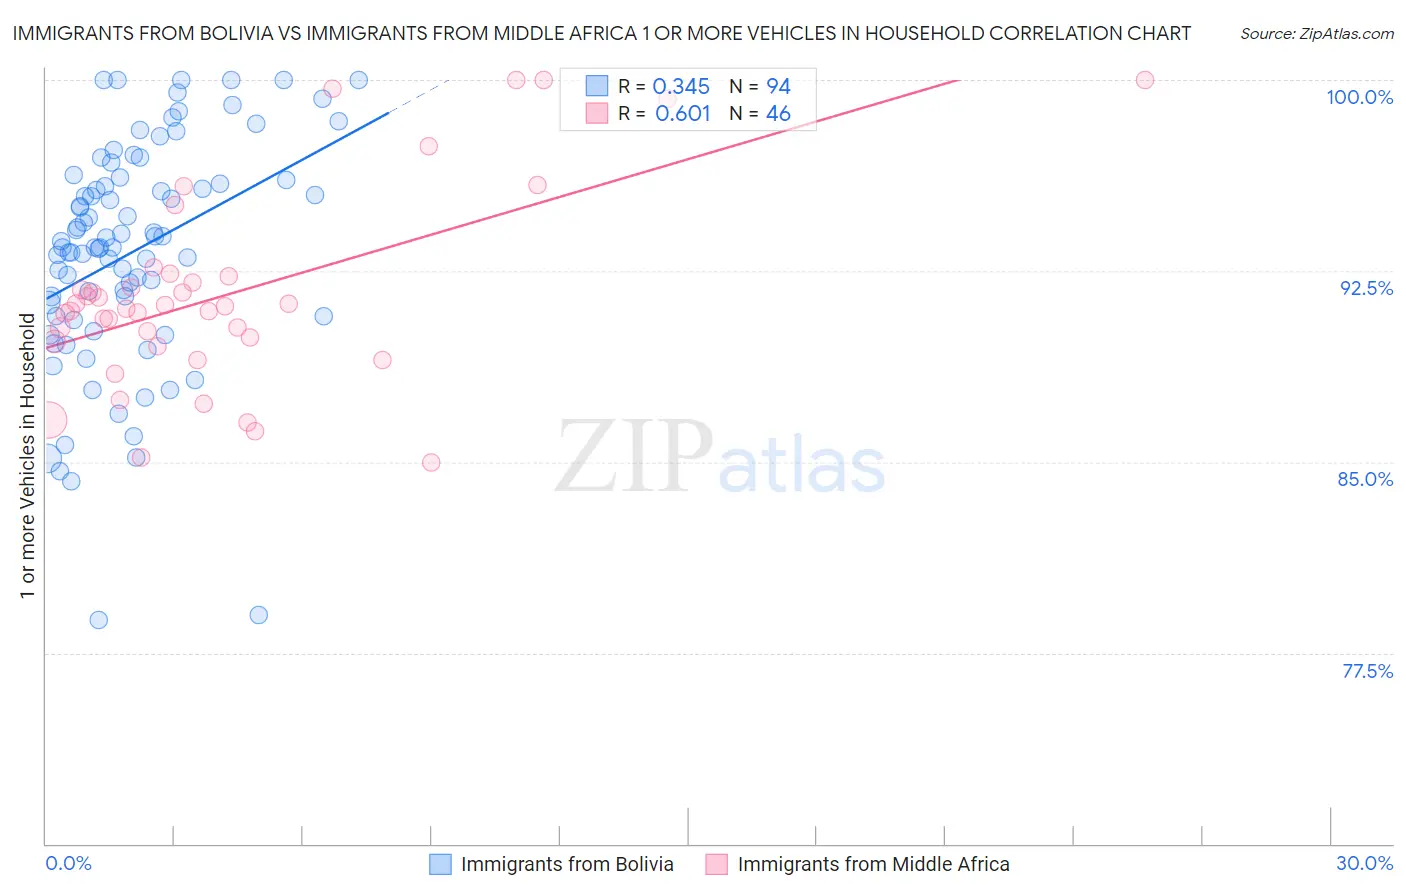 Immigrants from Bolivia vs Immigrants from Middle Africa 1 or more Vehicles in Household